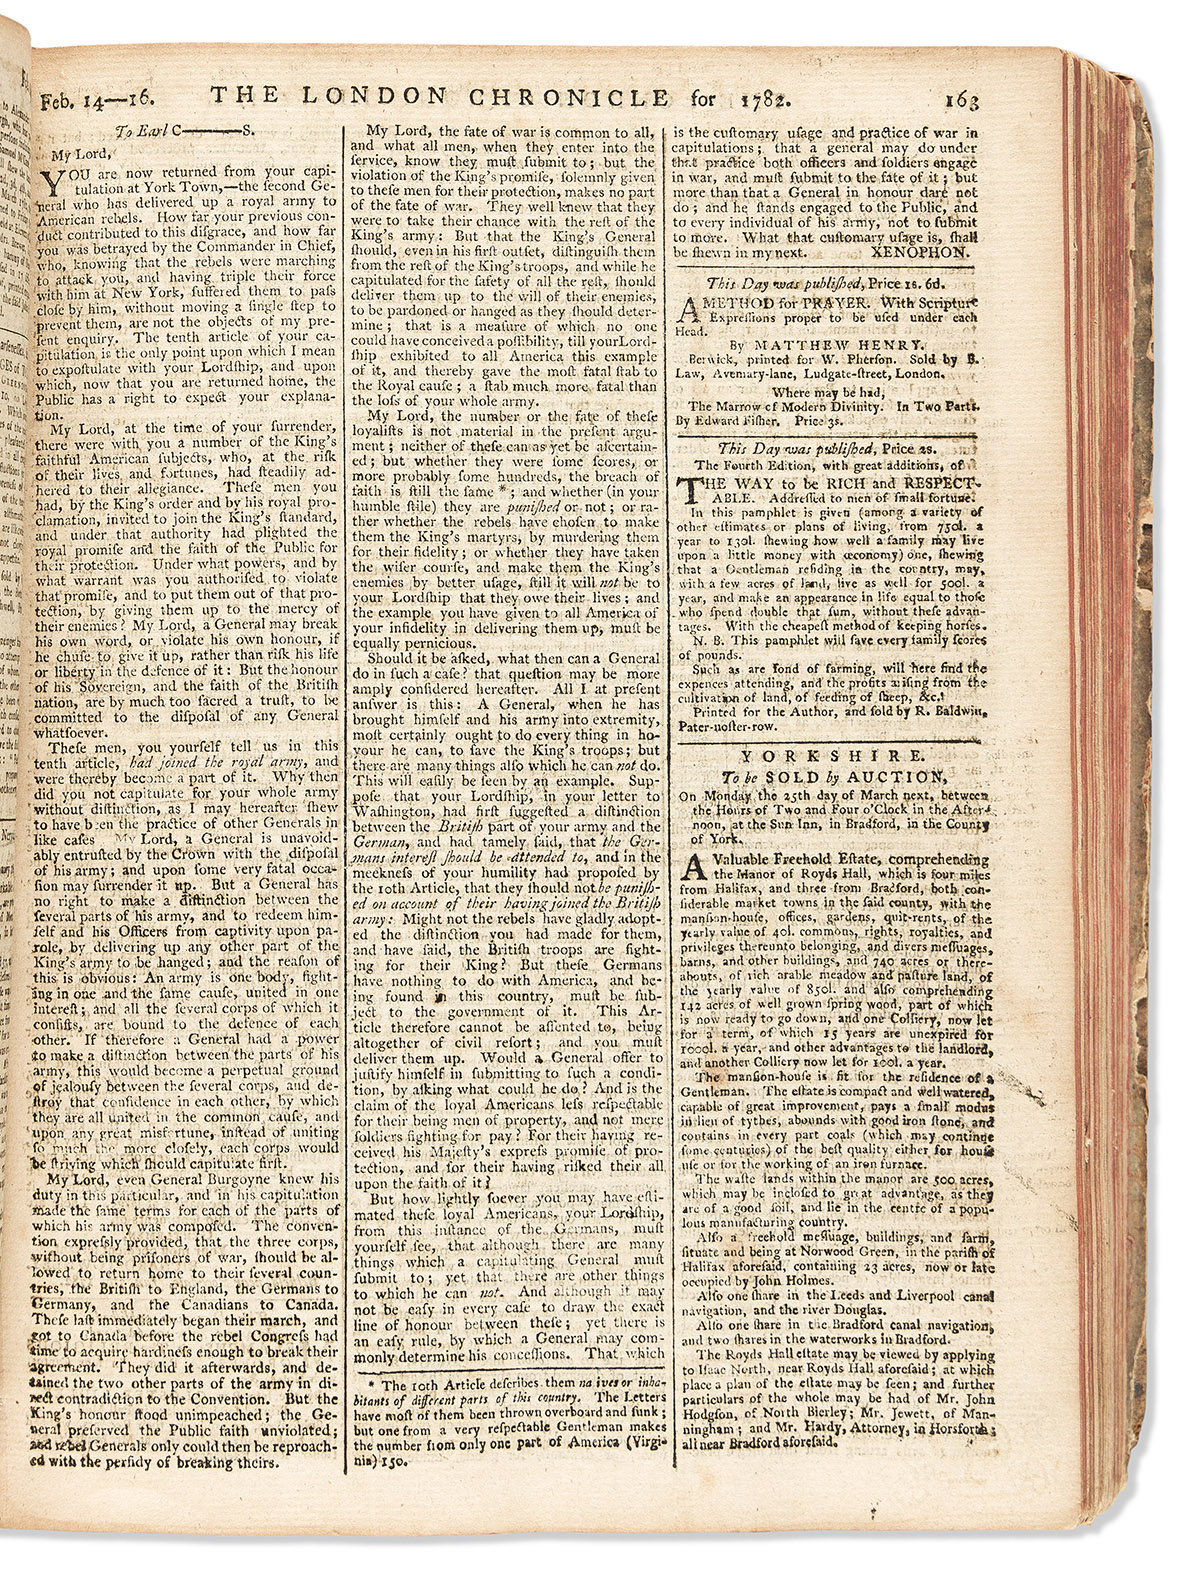 (AMERICAN REVOLUTION--1782.) Bound volume of the London Chronicle for the first half of 1782.